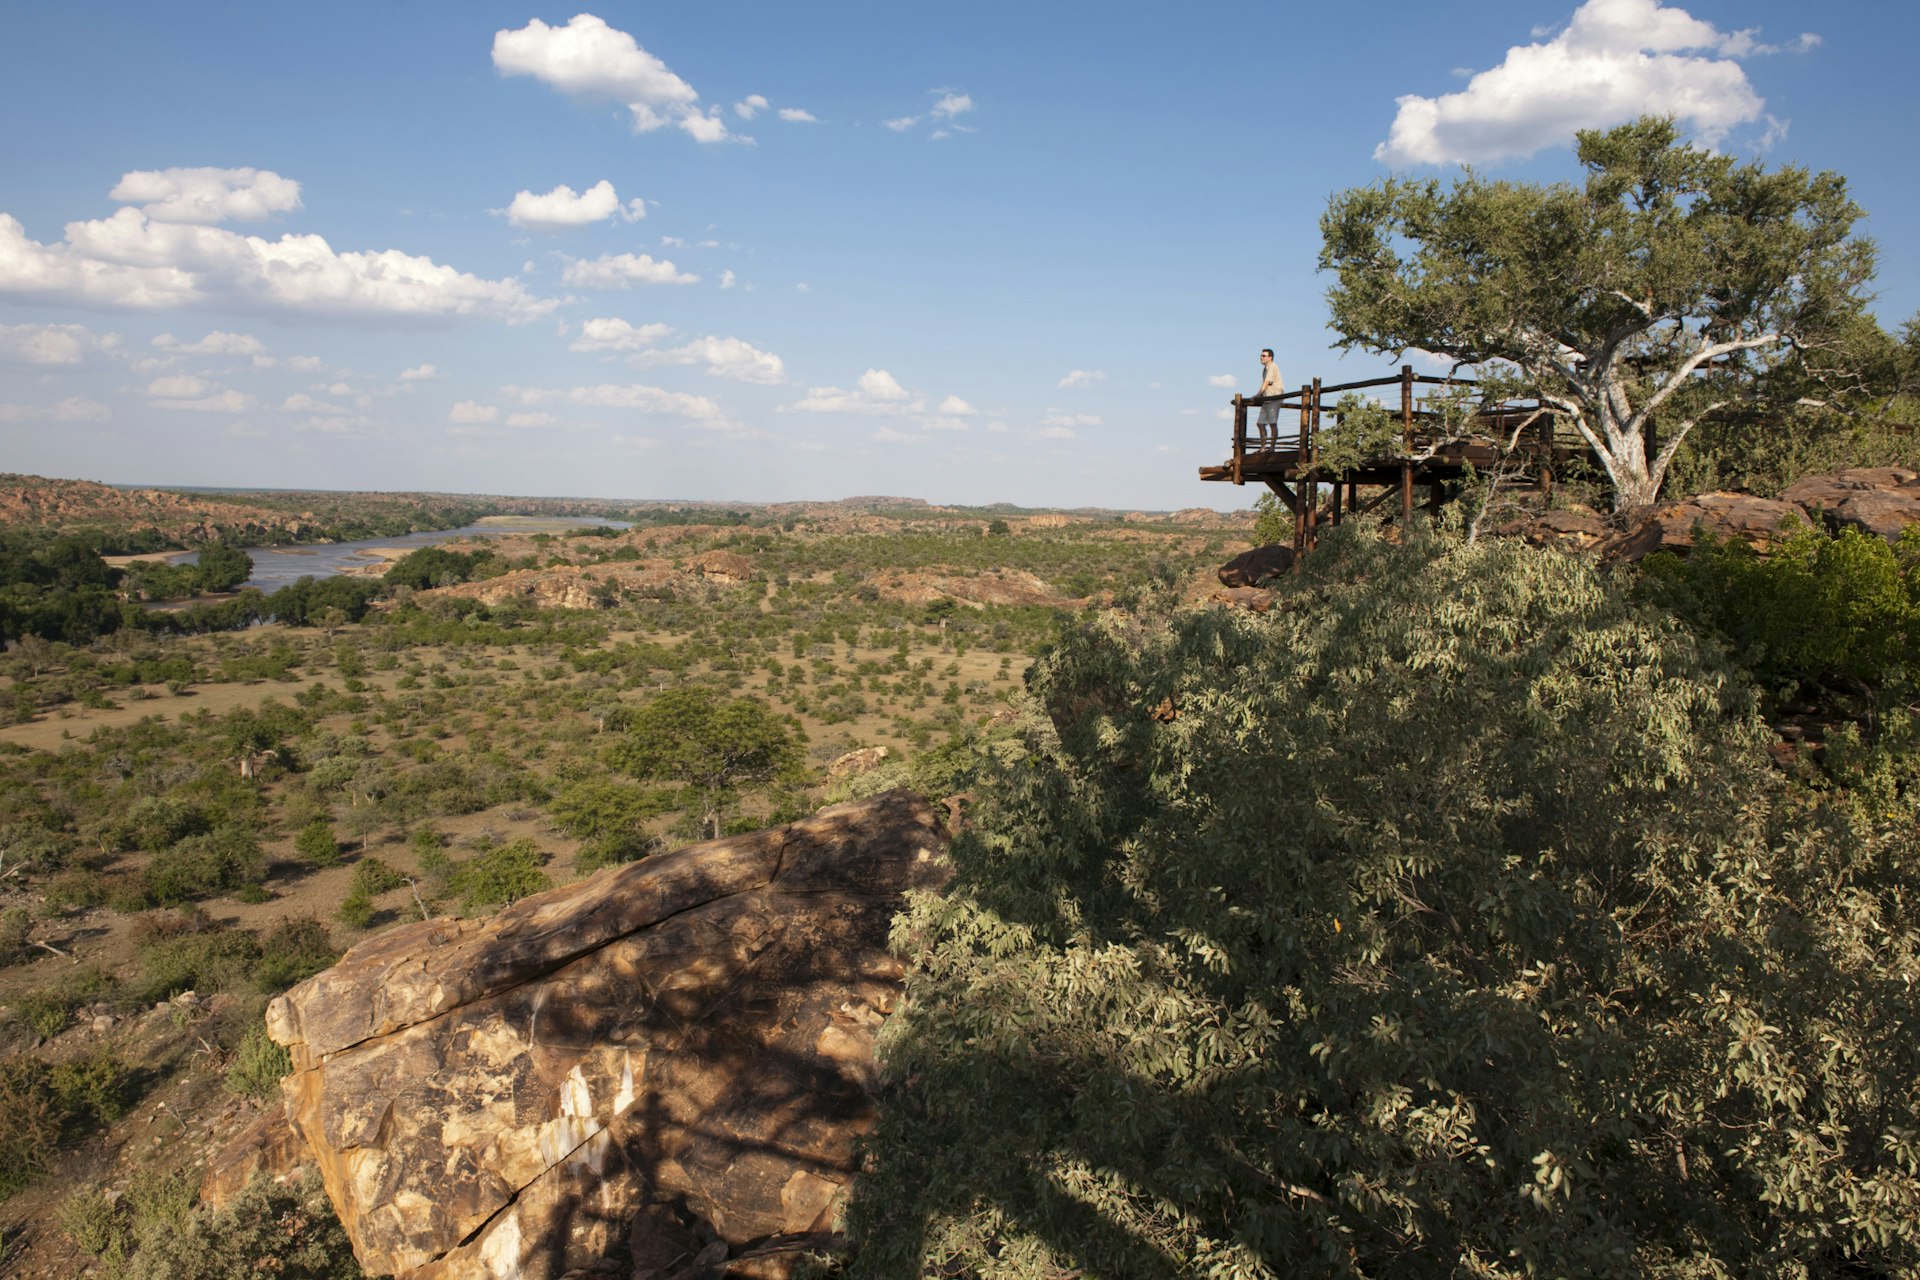 A tourist looks out at the confluence of the Limpopo and Shashe rivers in Mapungubwe National Park